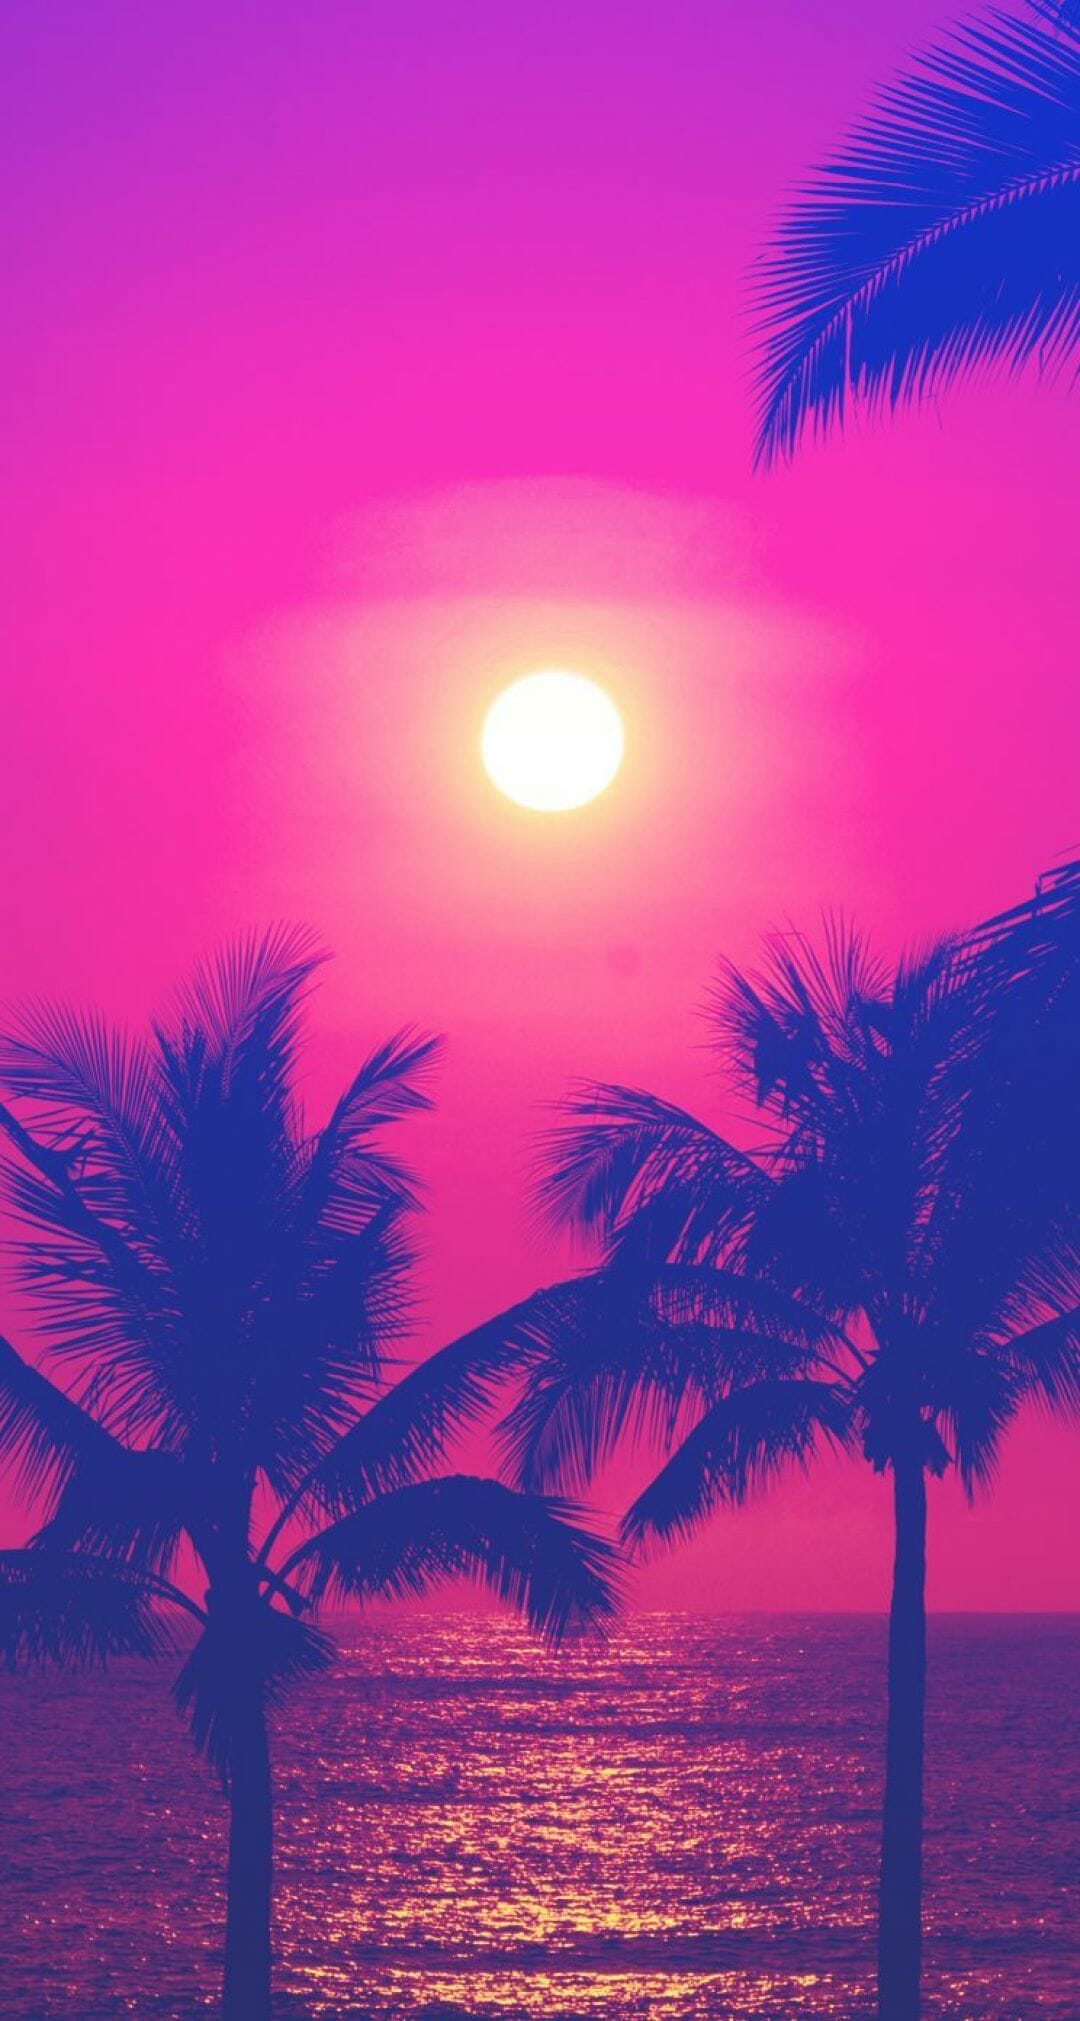 Neon / Hot pink blue sunset palms iphone wallpaper phone background (2022)